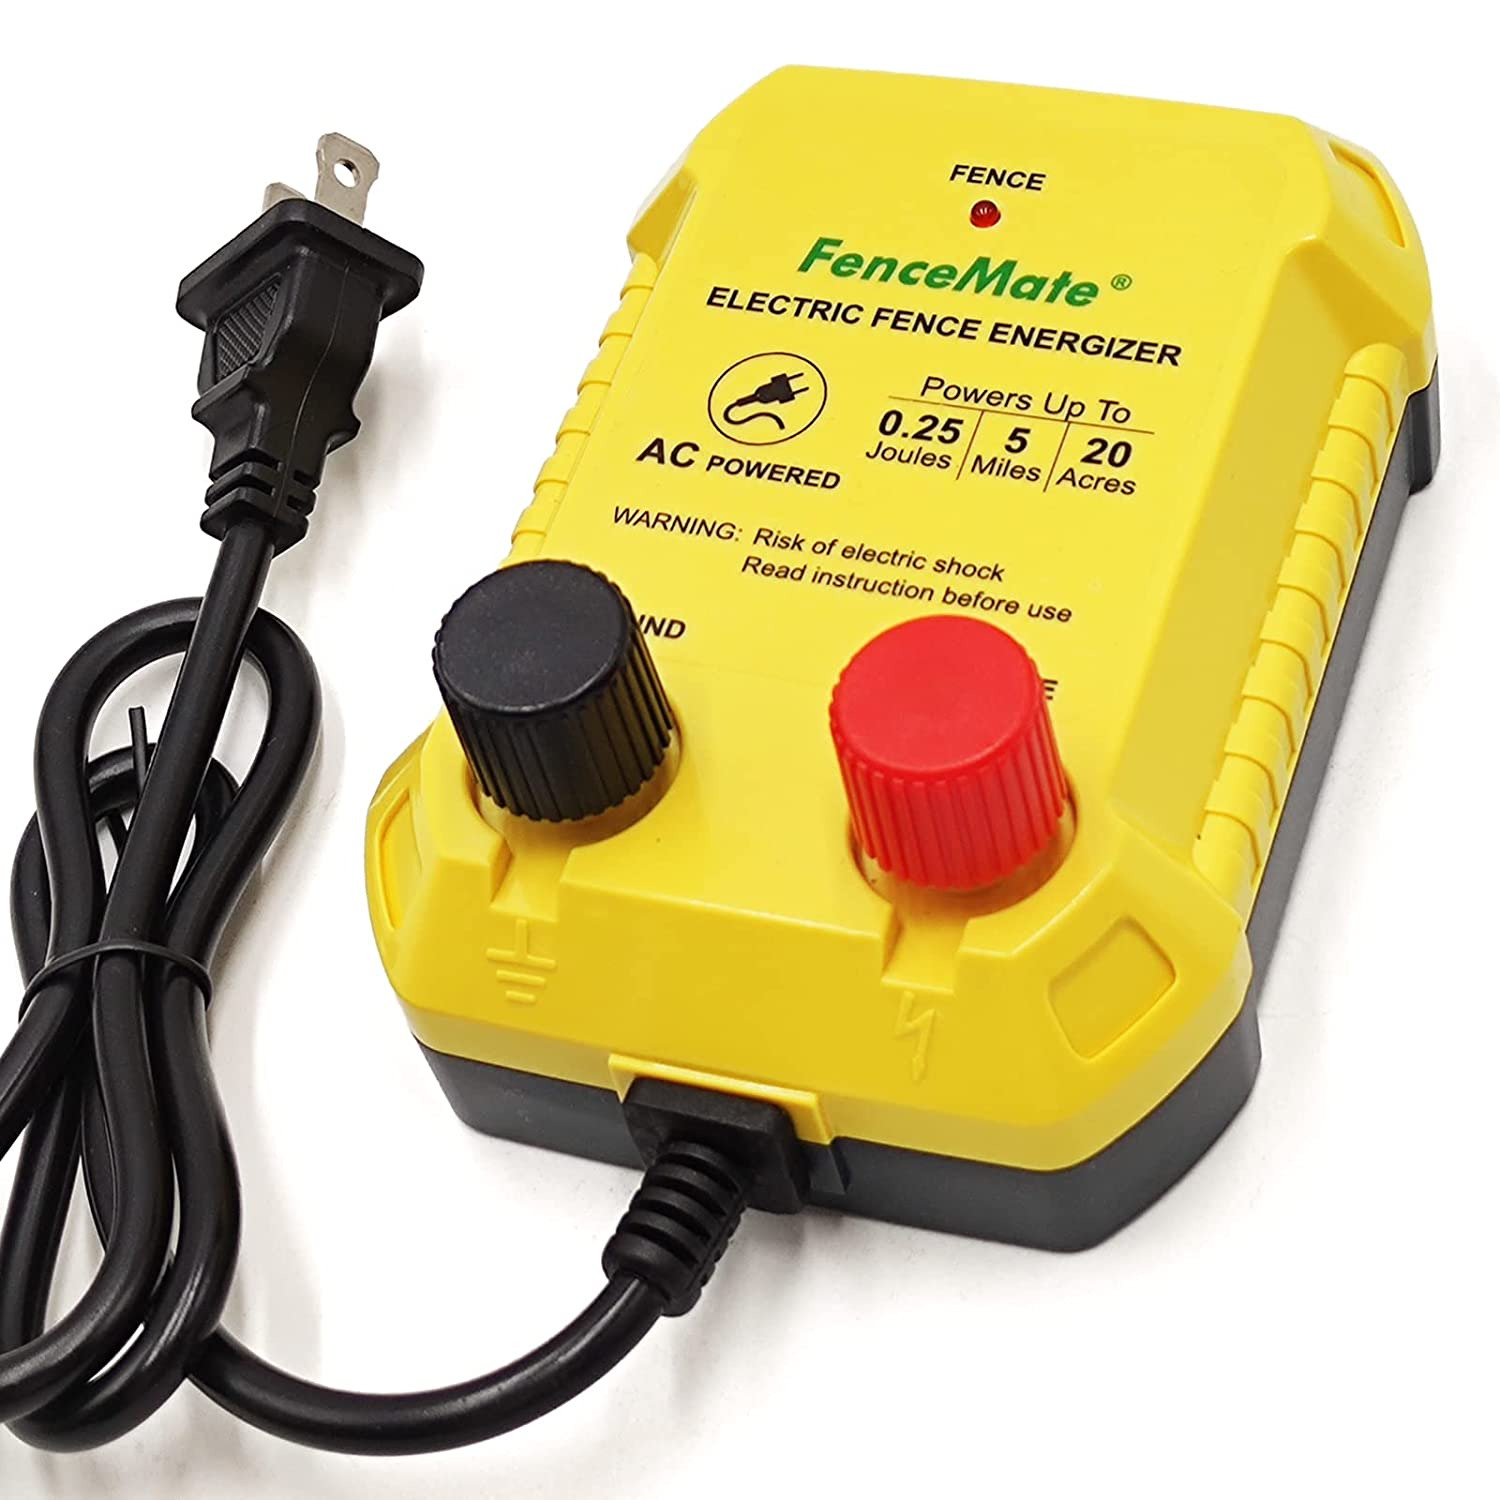 Low Impedance Fence Energizer AC Powered up to 5 Miles / 20 Acres, Fence Charger